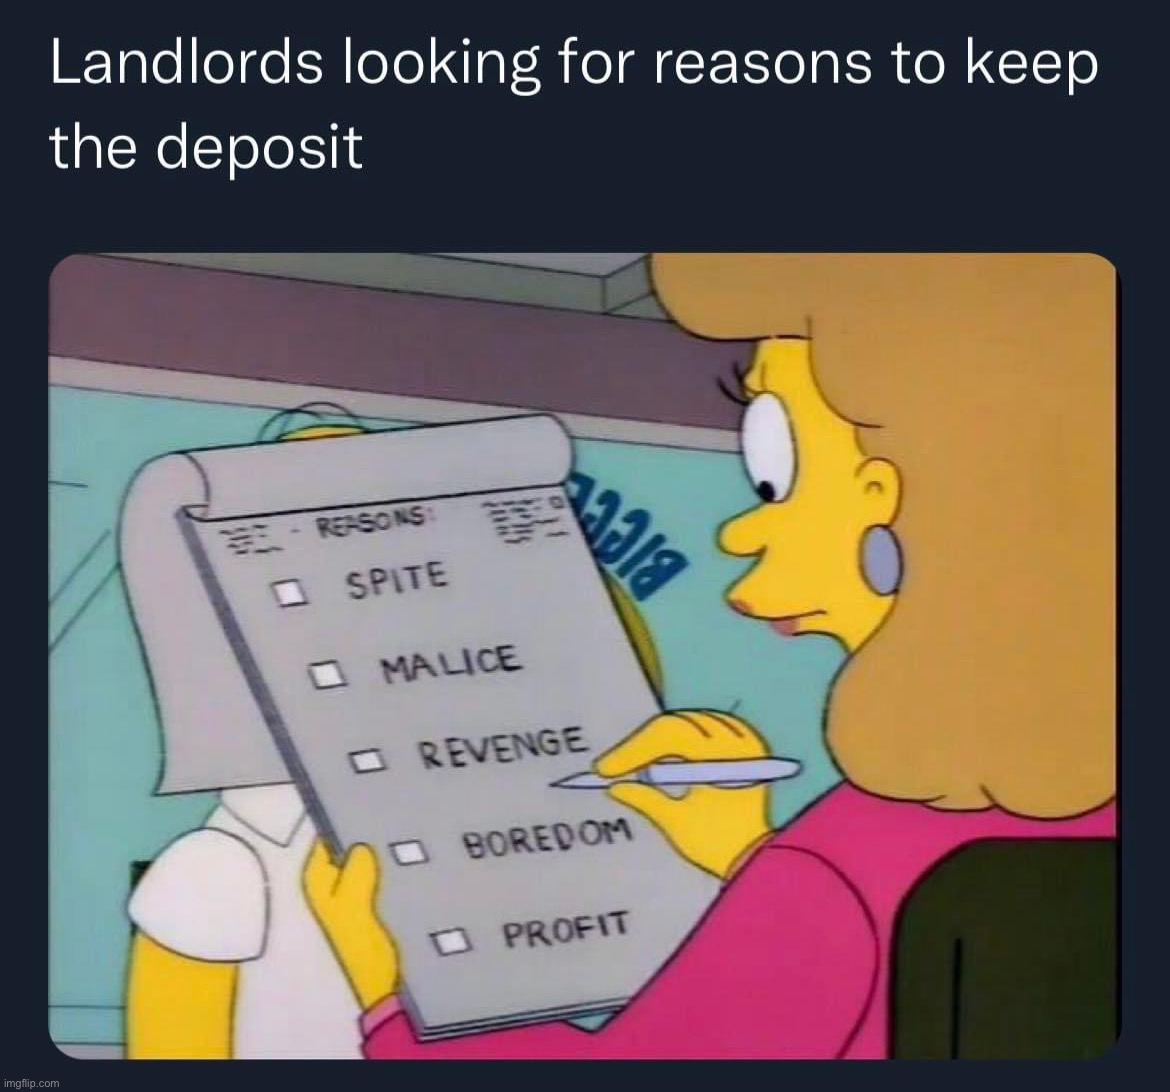 Please note I am a moderate center-Leftist, no more than strongly-worded letters for the landlords | image tagged in landlords deposit thieves,send,strongly-worded,letters,landlords | made w/ Imgflip meme maker